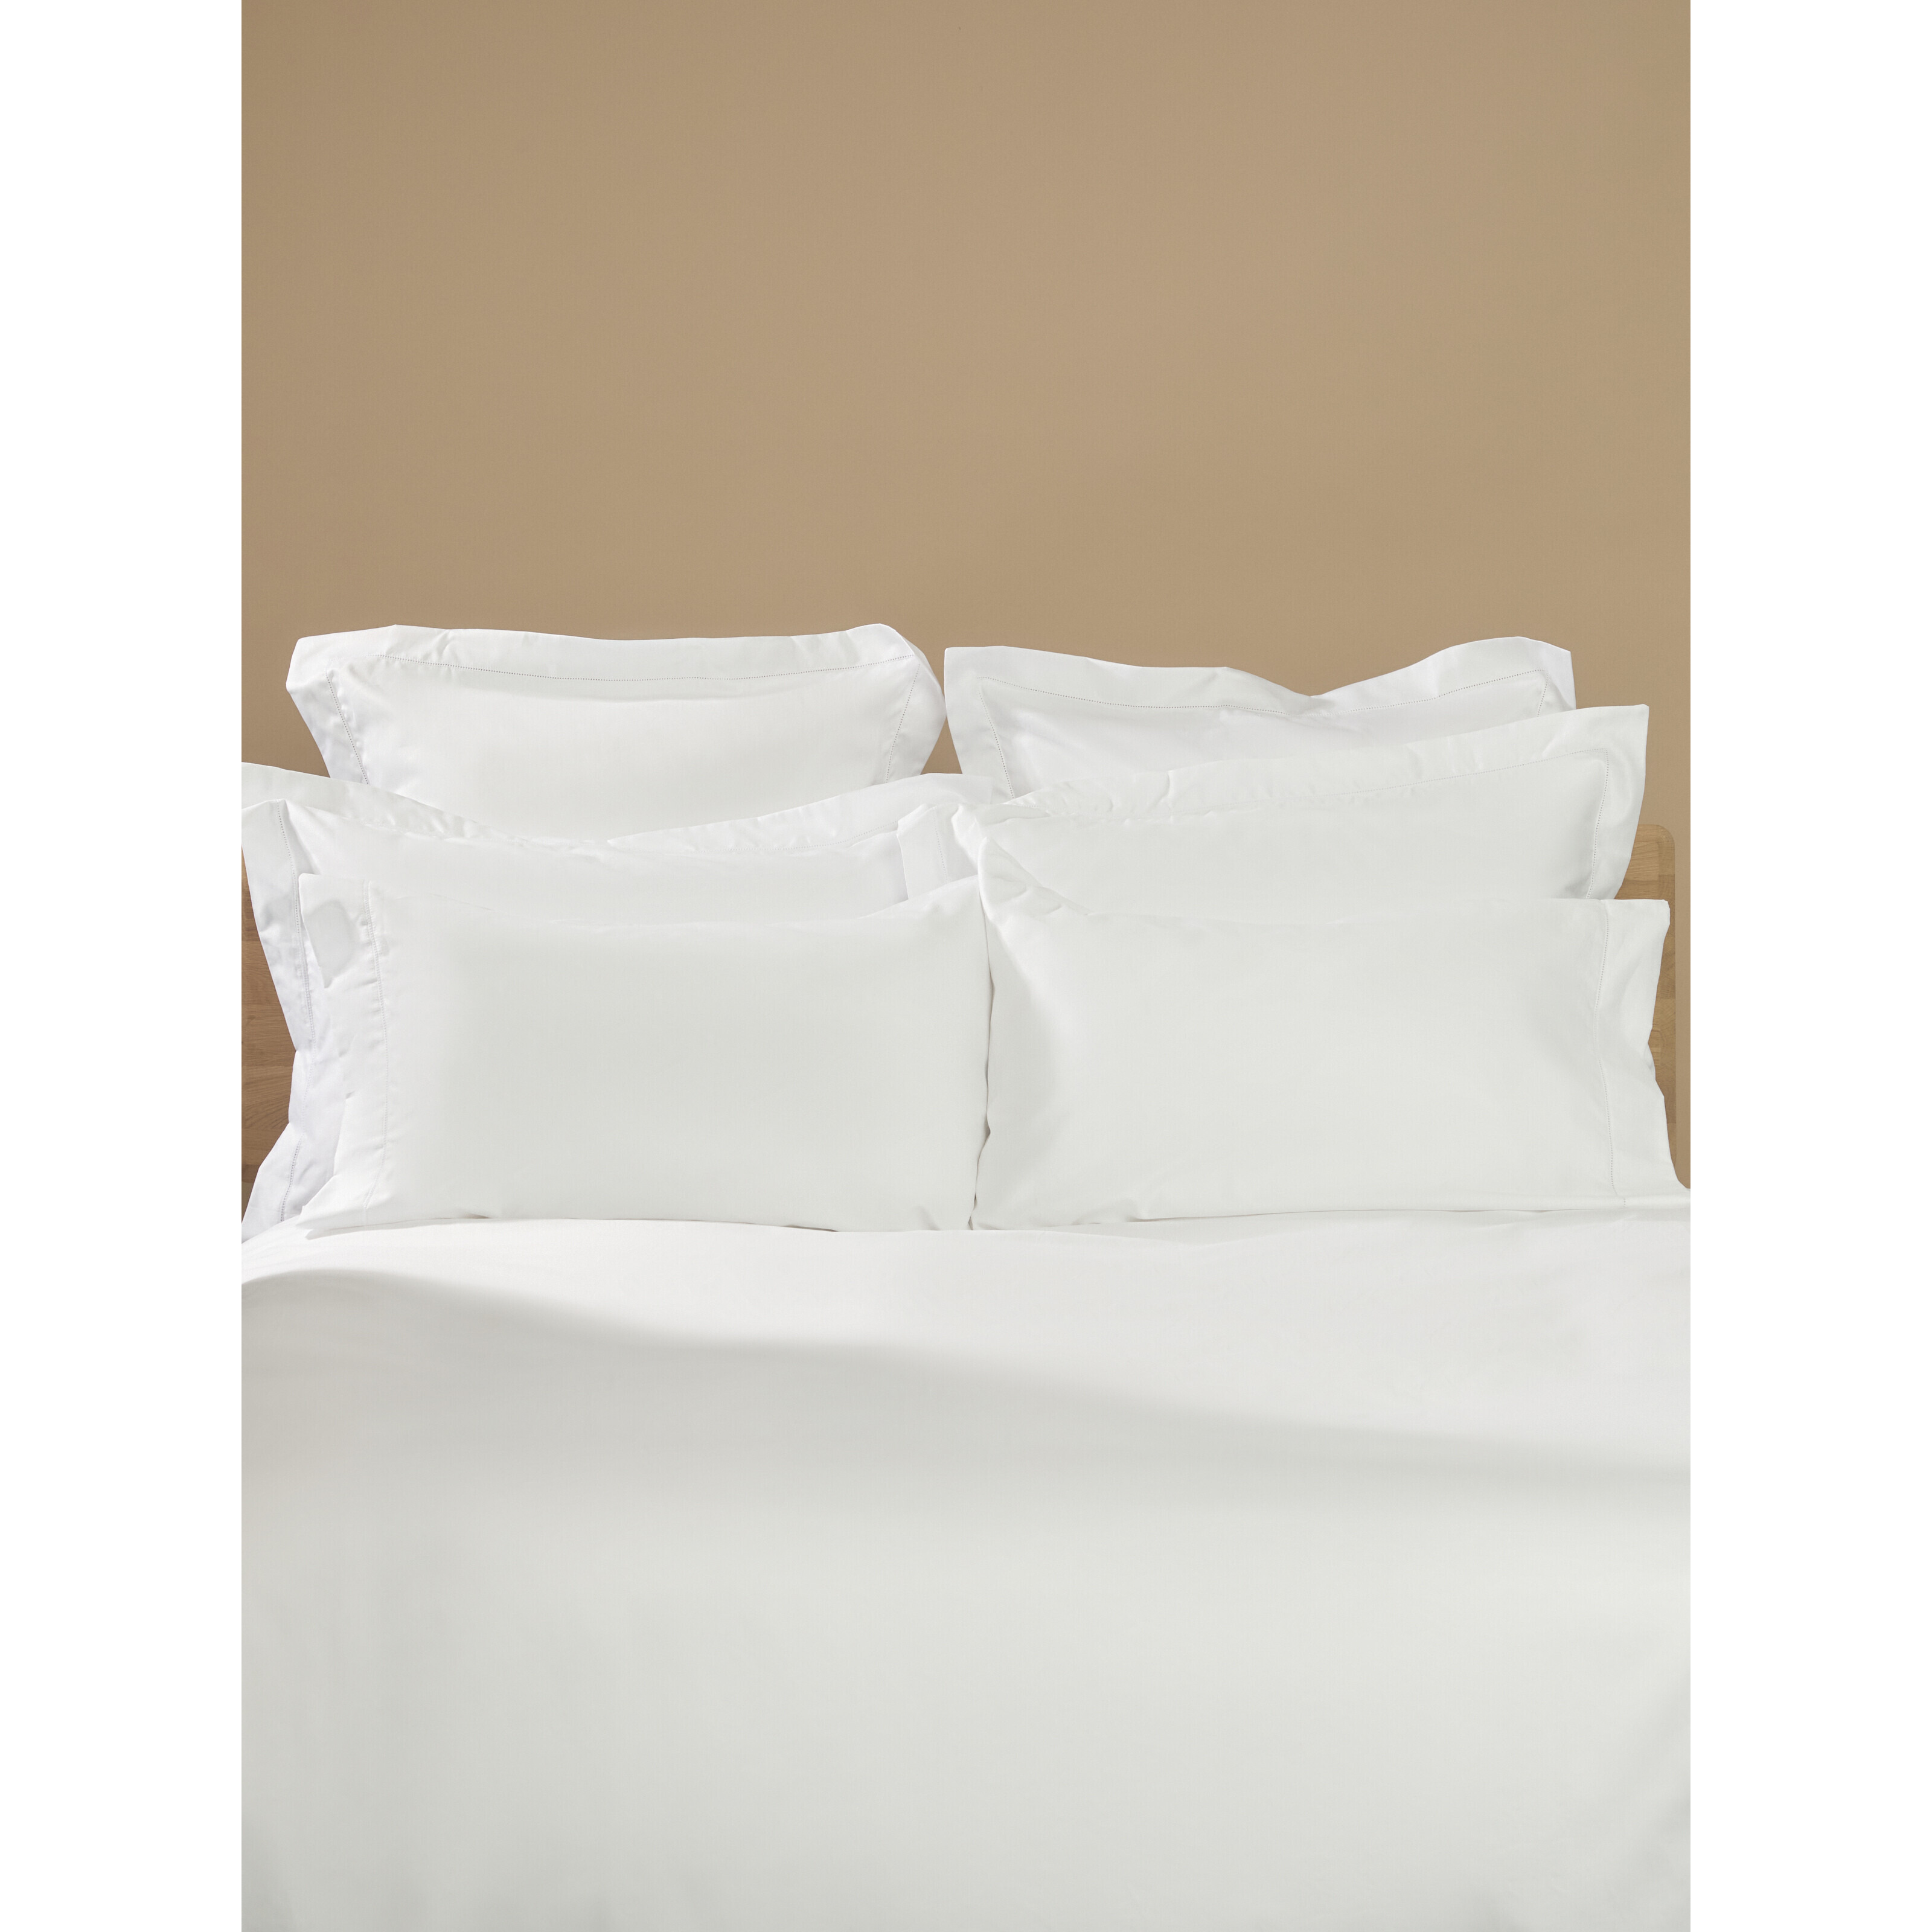 Fenwick at Home Mayfair Ultimate Egyptian Cotton Sateen Long Oxford Pillowcase 50 x 90 cm - Size Large White - image 1